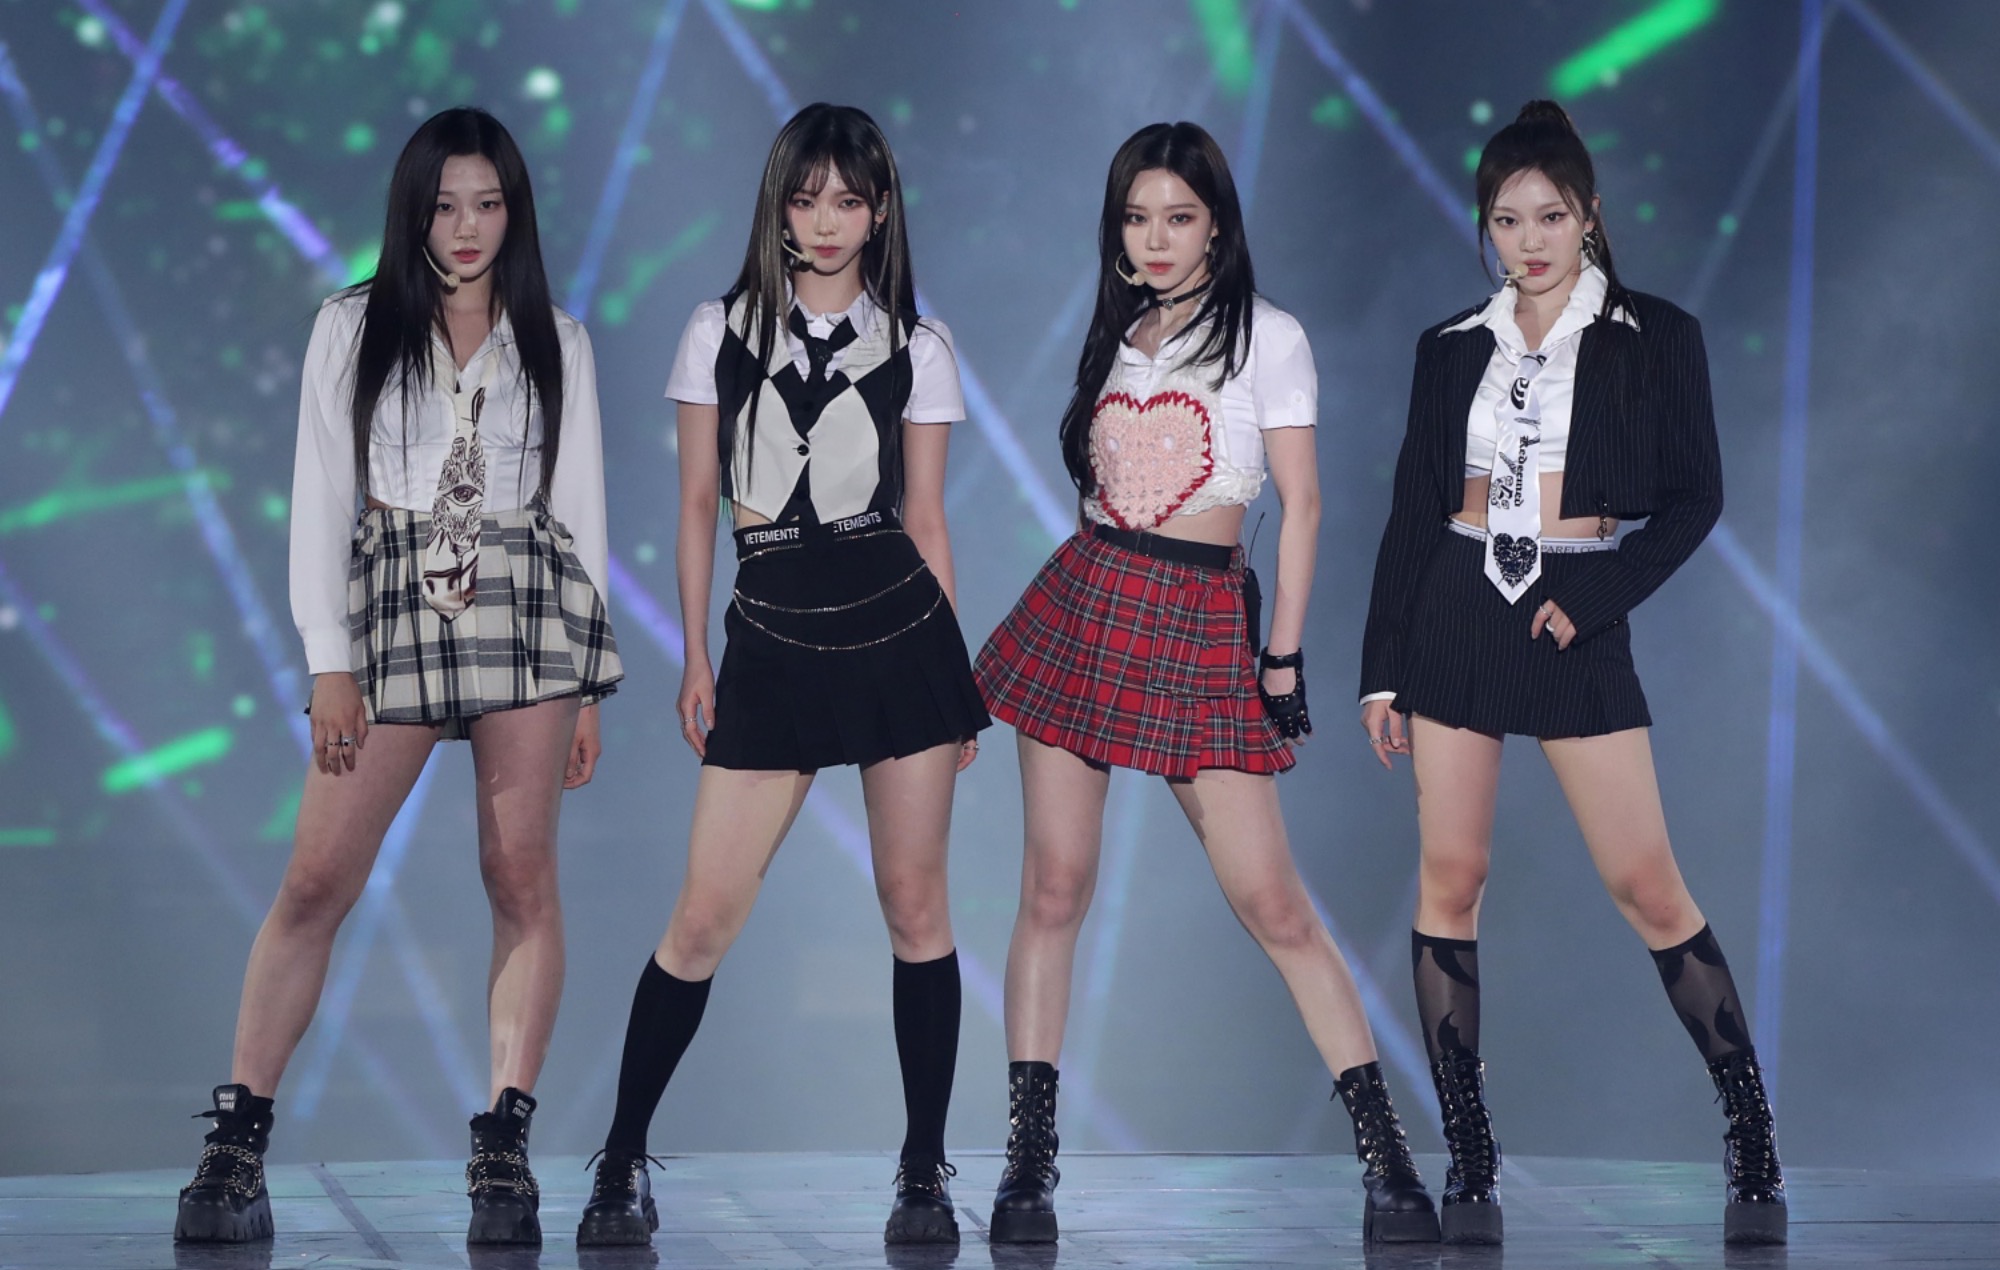 Watch aespa perform ‘Salty and Sweet’, ‘Thirsty’ and other new songs at first concert